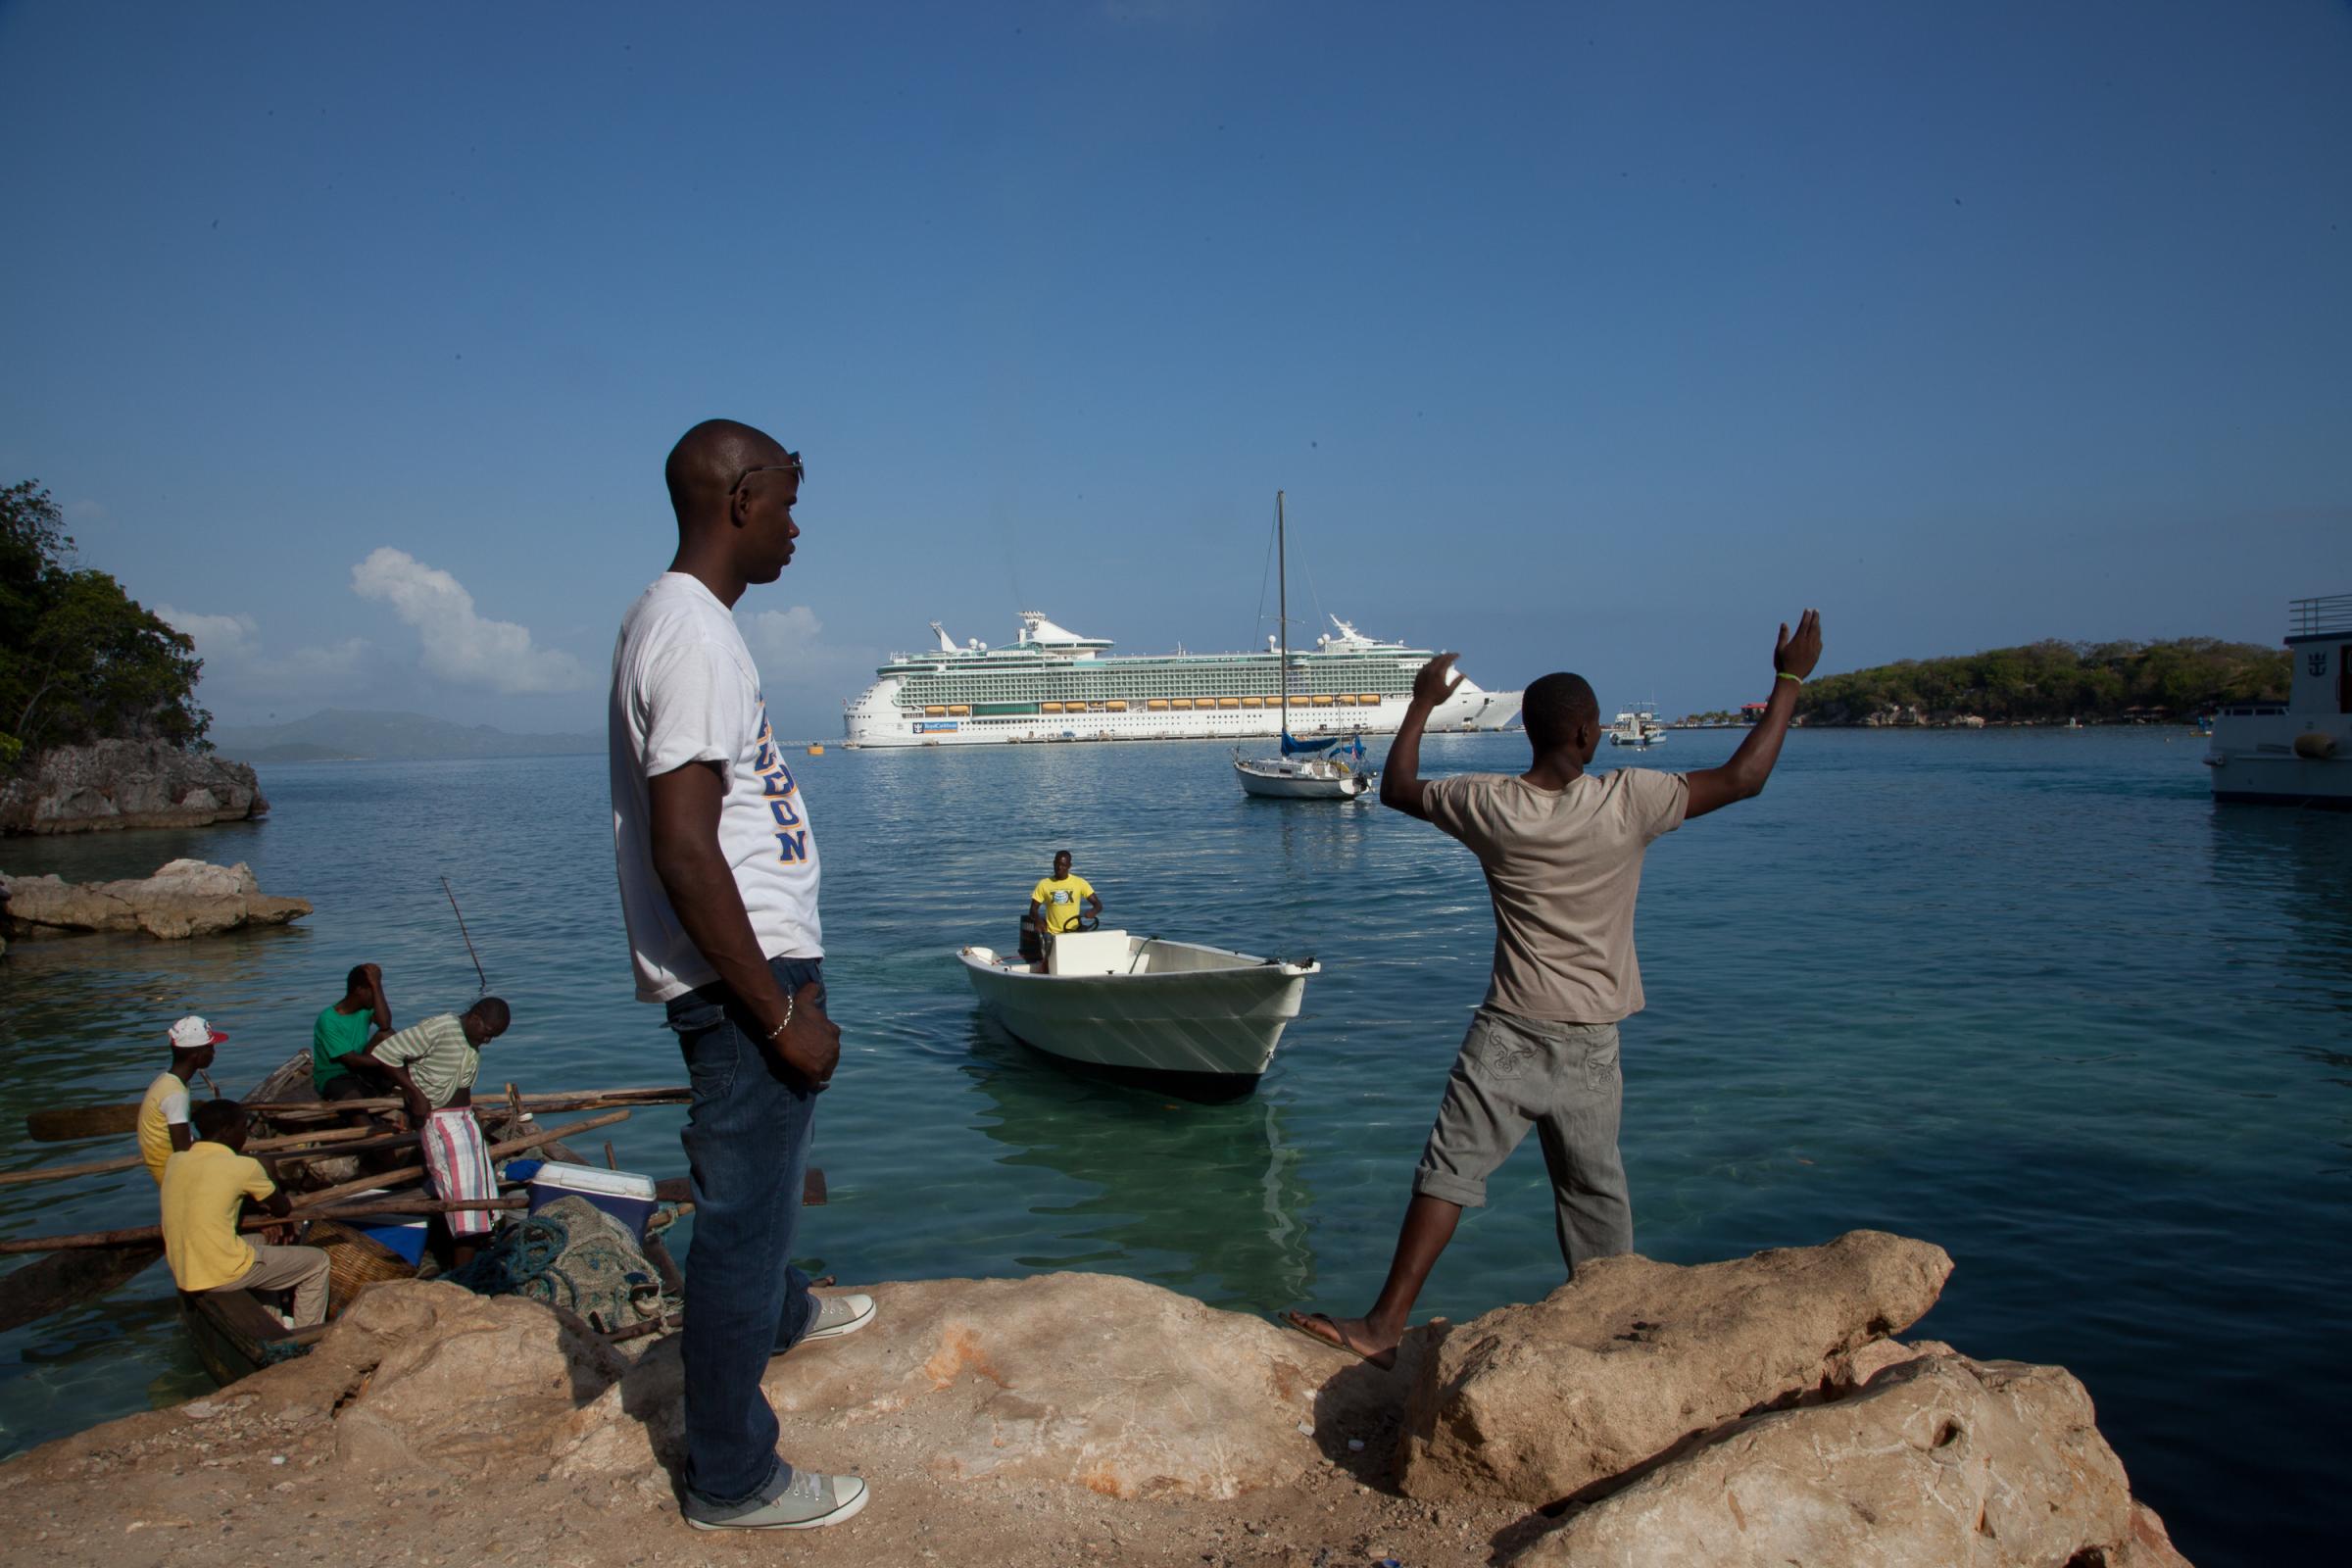 A Royal Caribbean cruise ship seen from the village of Labadie, Haiti, on July 22, 2015.